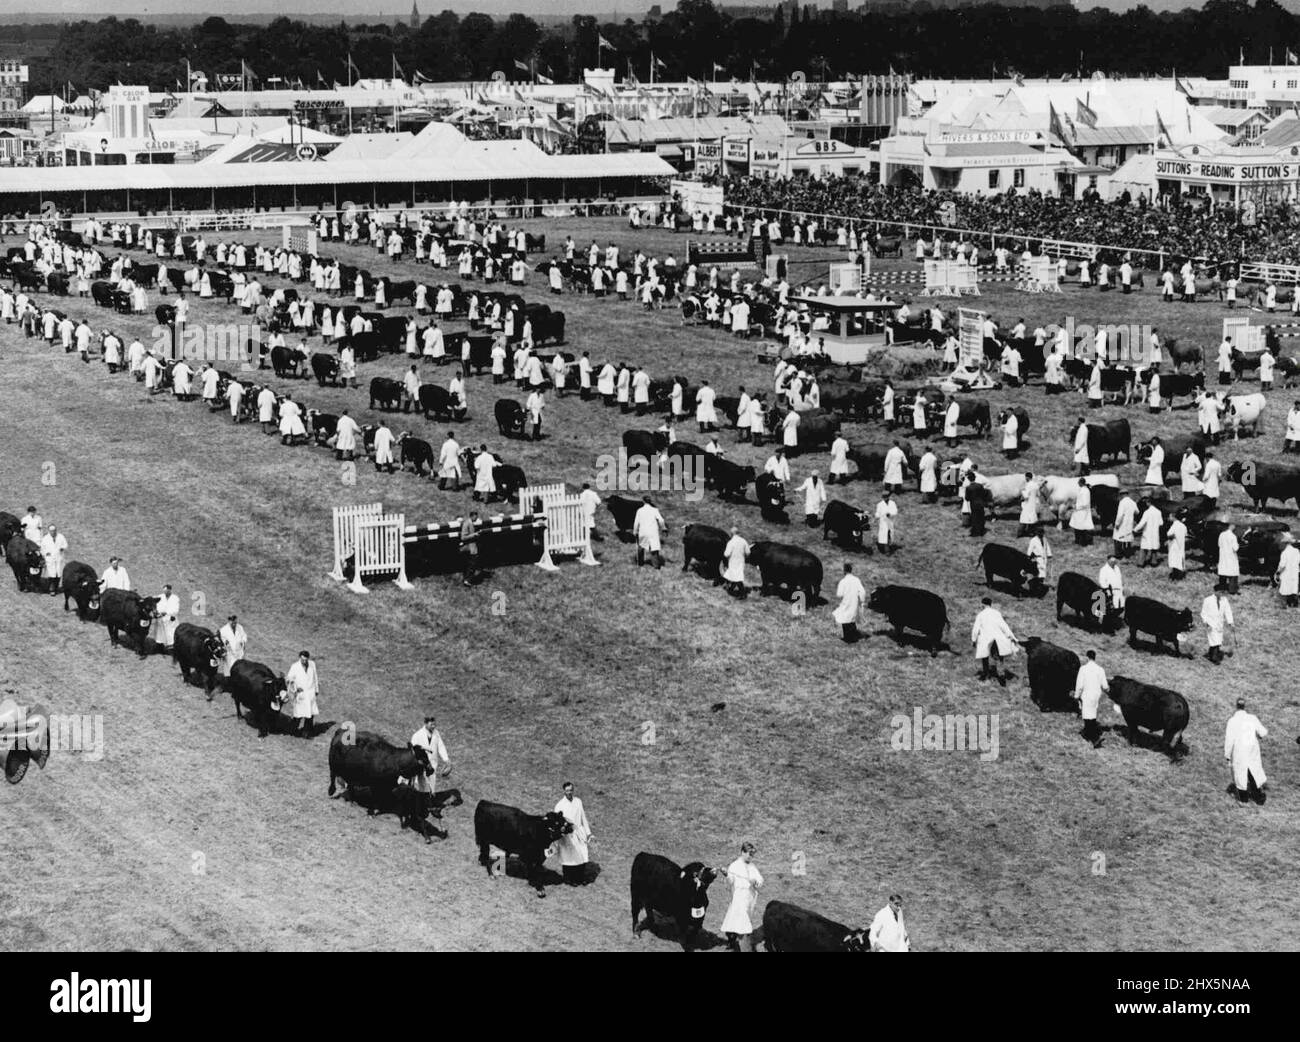 Royal Show, Windsor -- General view of the cattle being paraded at the Royal show to-day. These things happened at the Royal Show among the oaks of Windsor Great Park today. The Queen arrived for an official visit, and four Royal Parties toured the show ground at the same time. July 7, 1954. (Photo by Daily Mail Contract Picture). Stock Photo